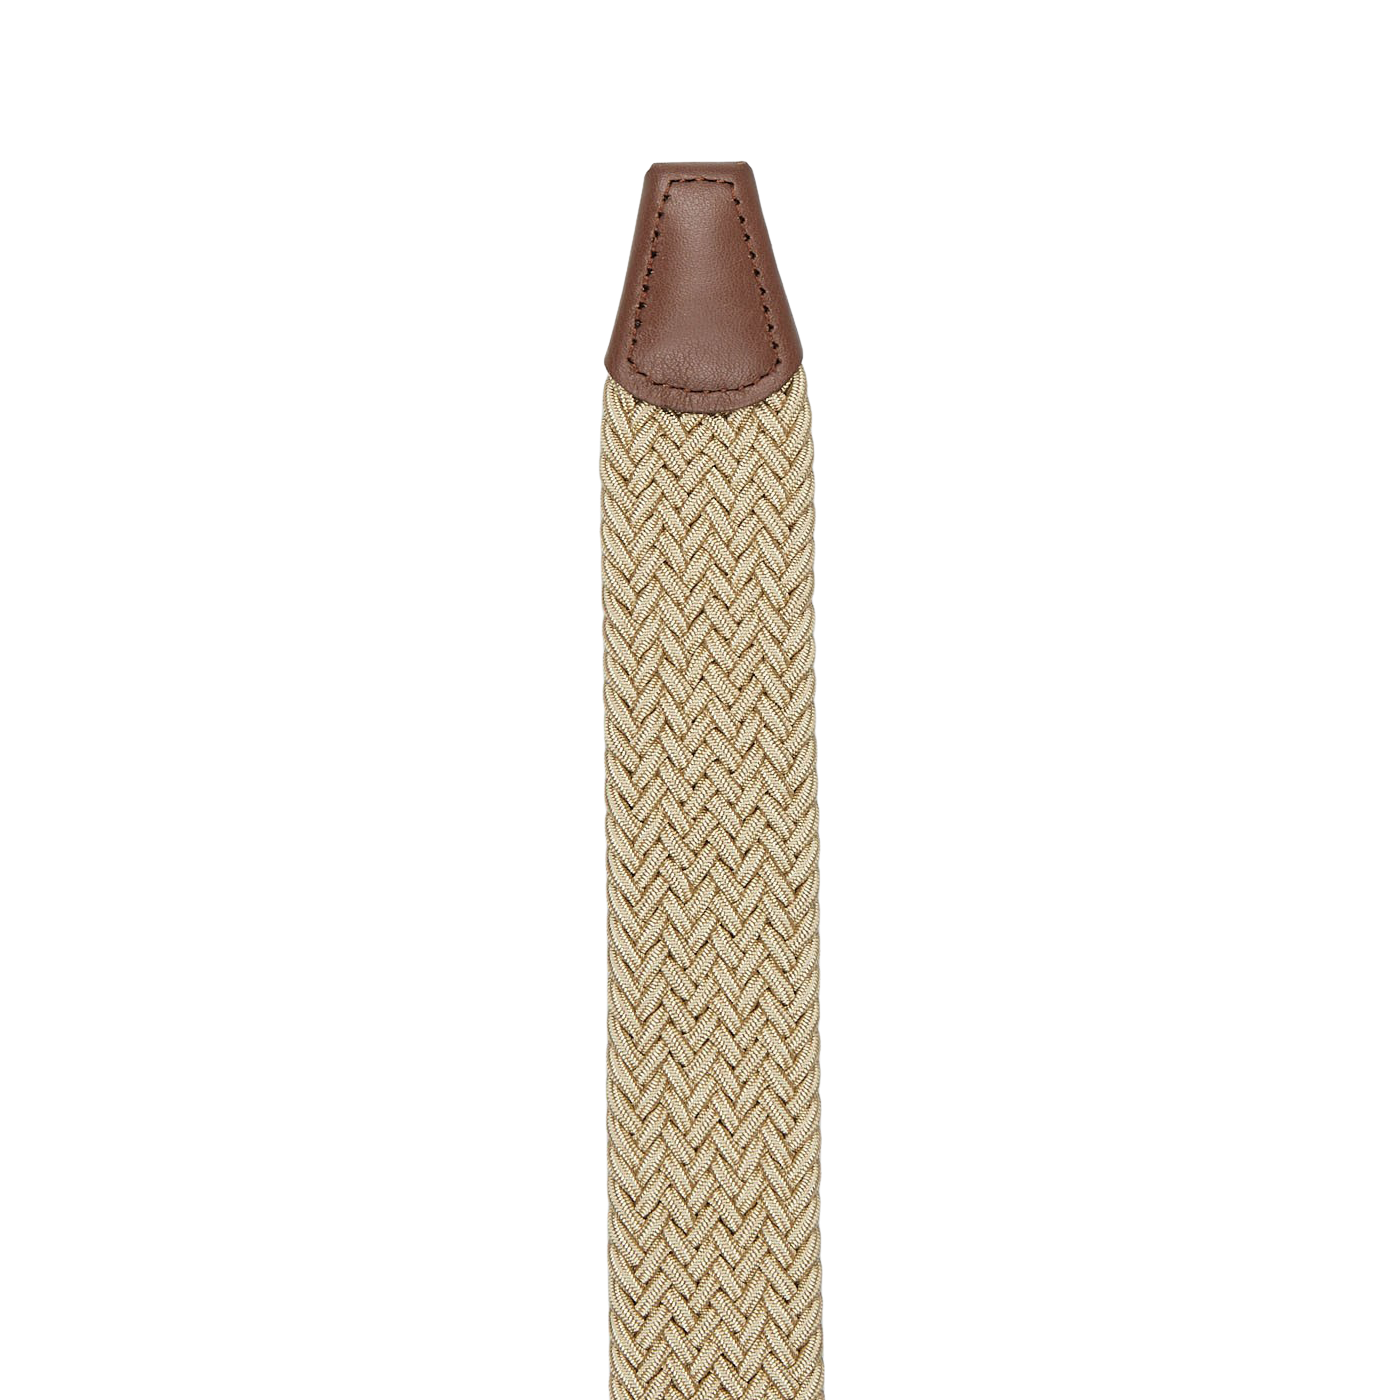 A close-up of a Light Beige Elastic Woven 35mm Belt by Anderson's with a brown leather tip and a silver buckle, handmade in Italy.